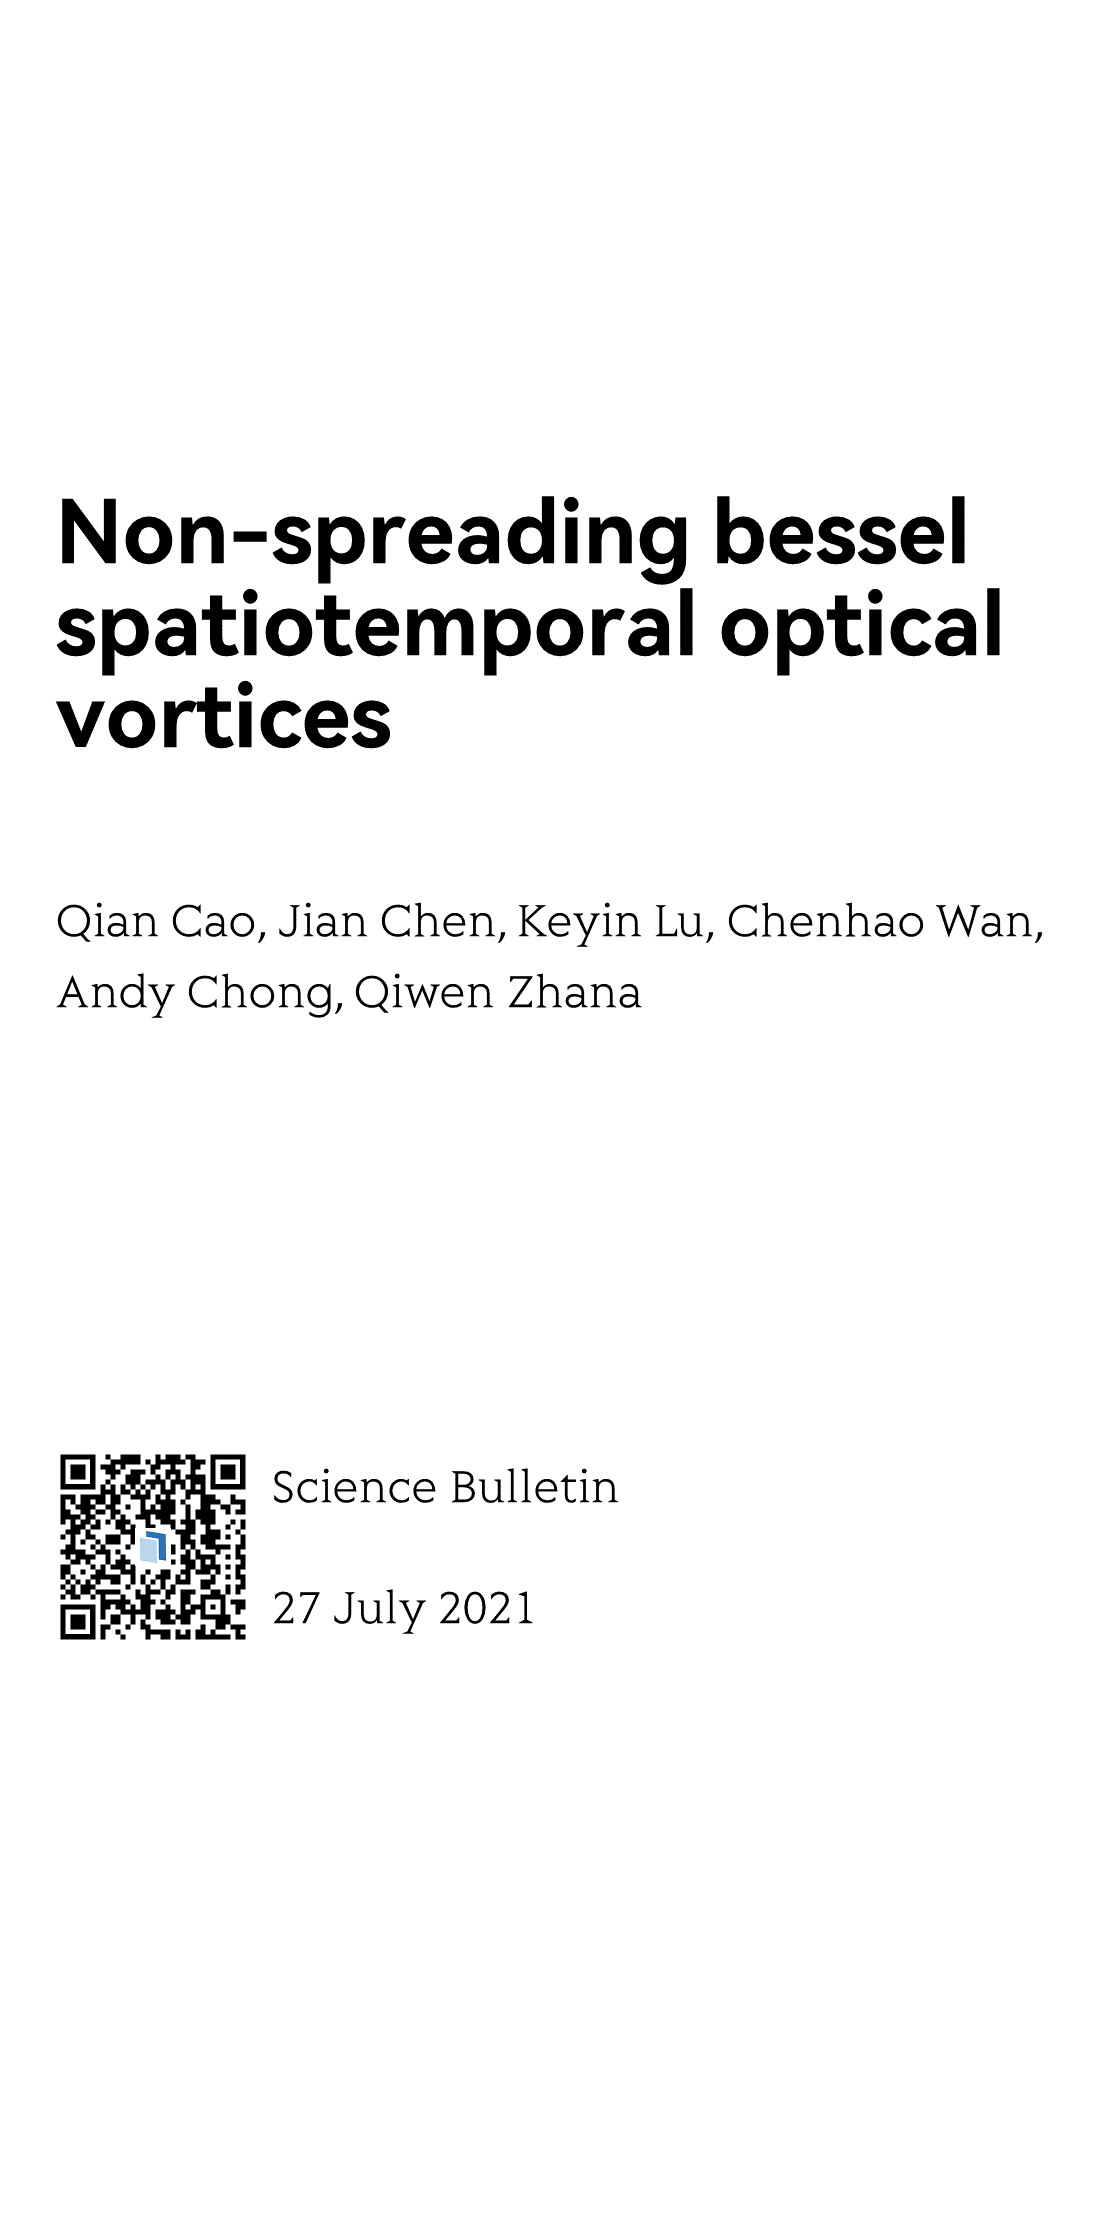 Non-spreading bessel spatiotemporal optical vortices_1